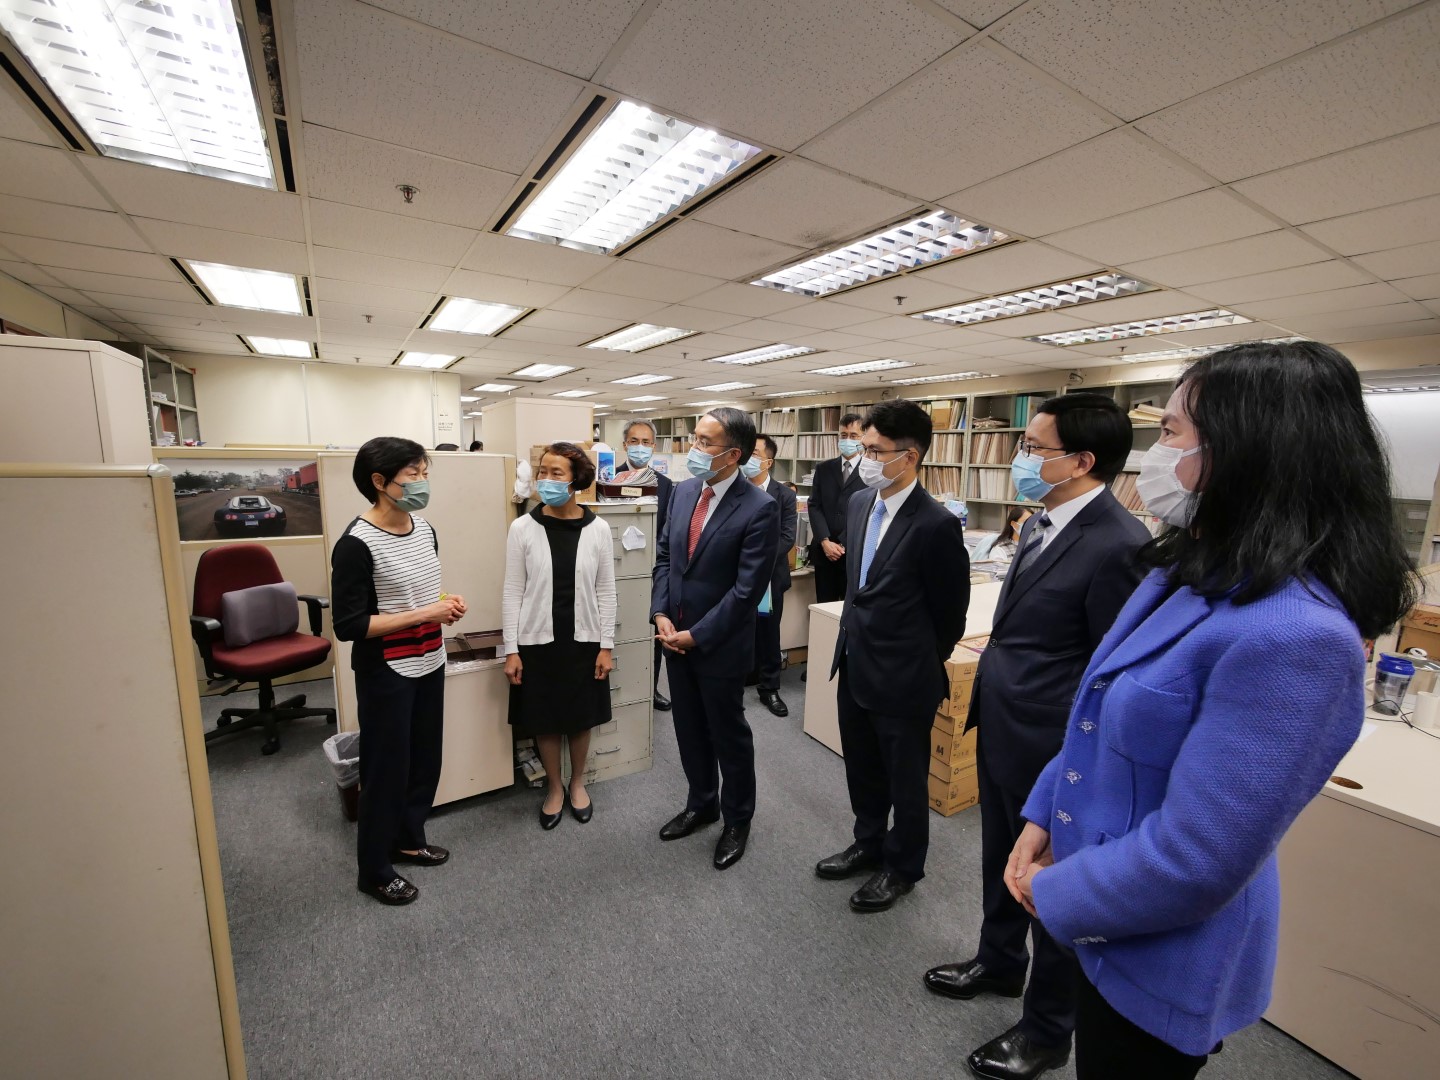 Mr Hui was briefed by staff of the Regularity Audit Division
